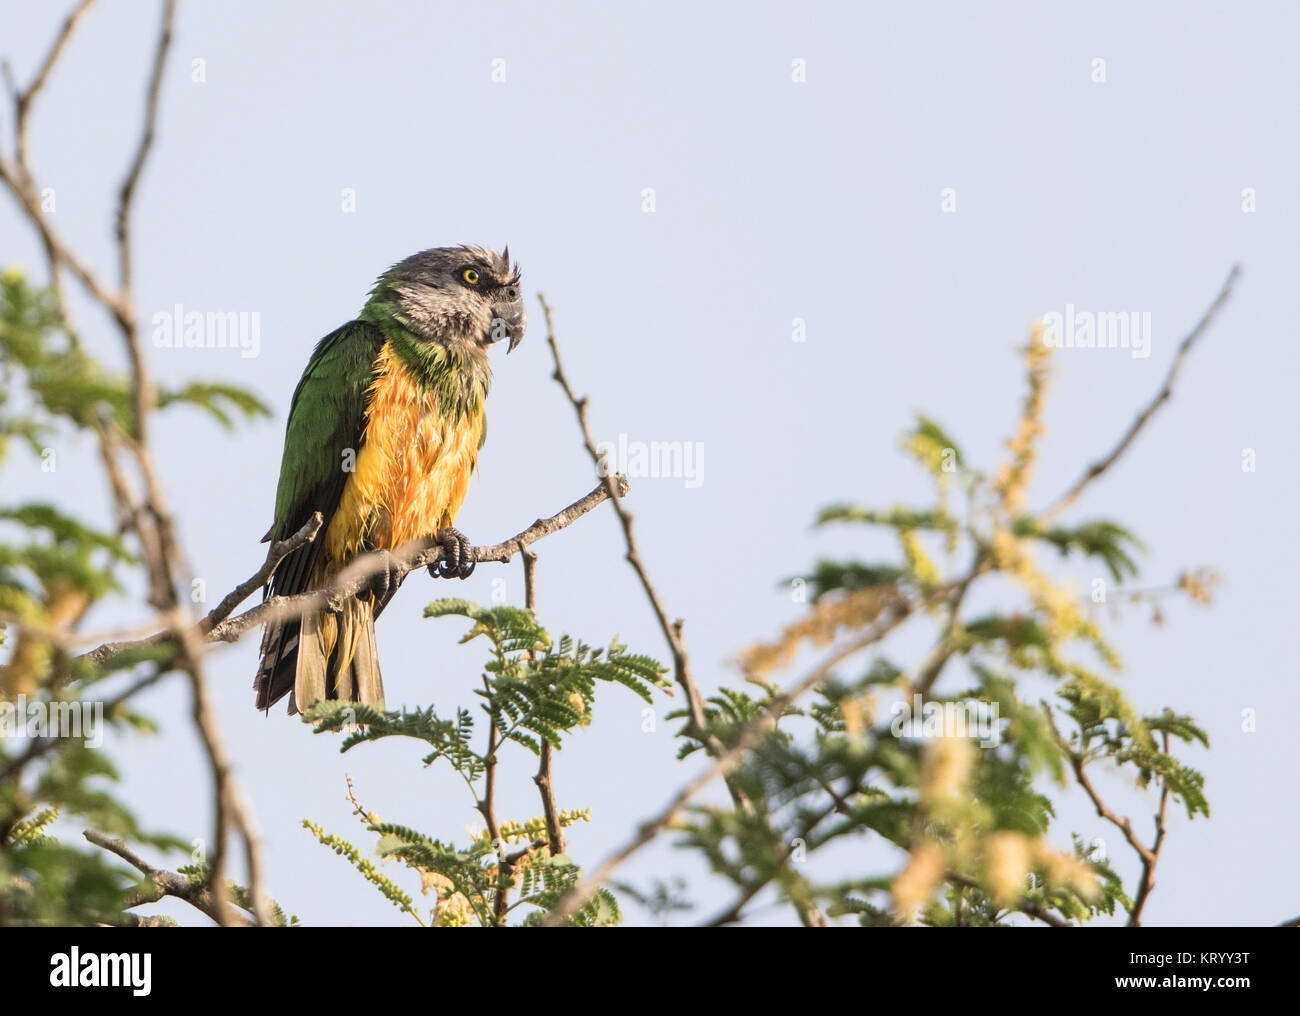 Senegal parrot Poicephalus senegalus adult perched in tree canopy, Gambia Stock Photo